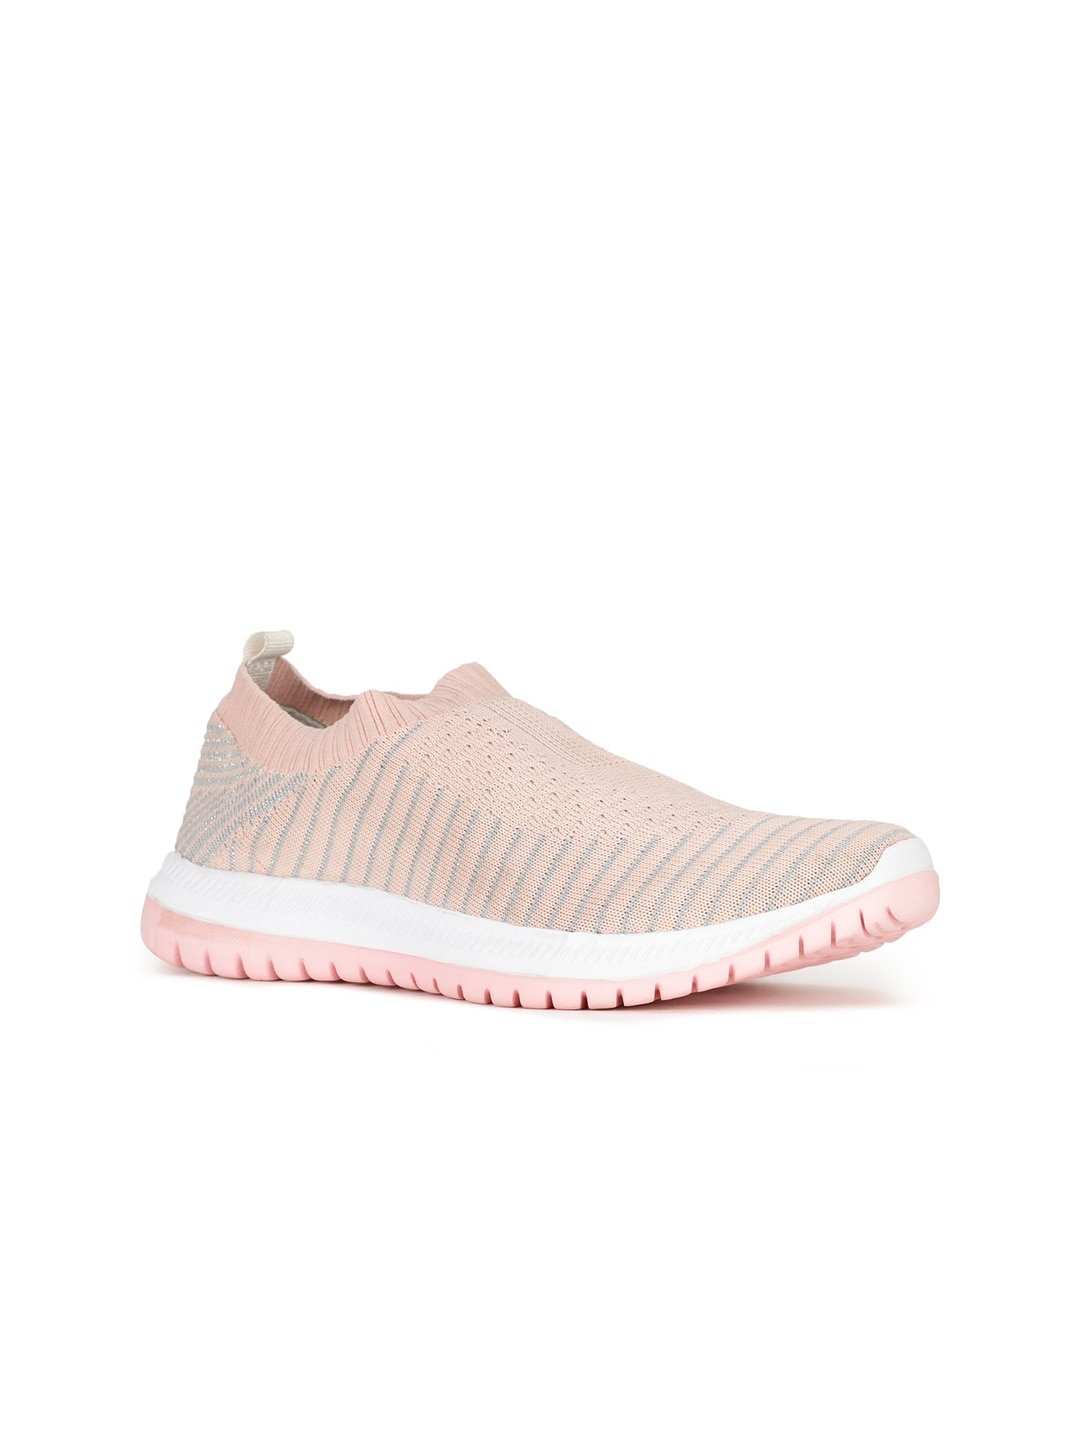 North Star Women Pink Woven Design PU Slip-On Sneakers Price in India